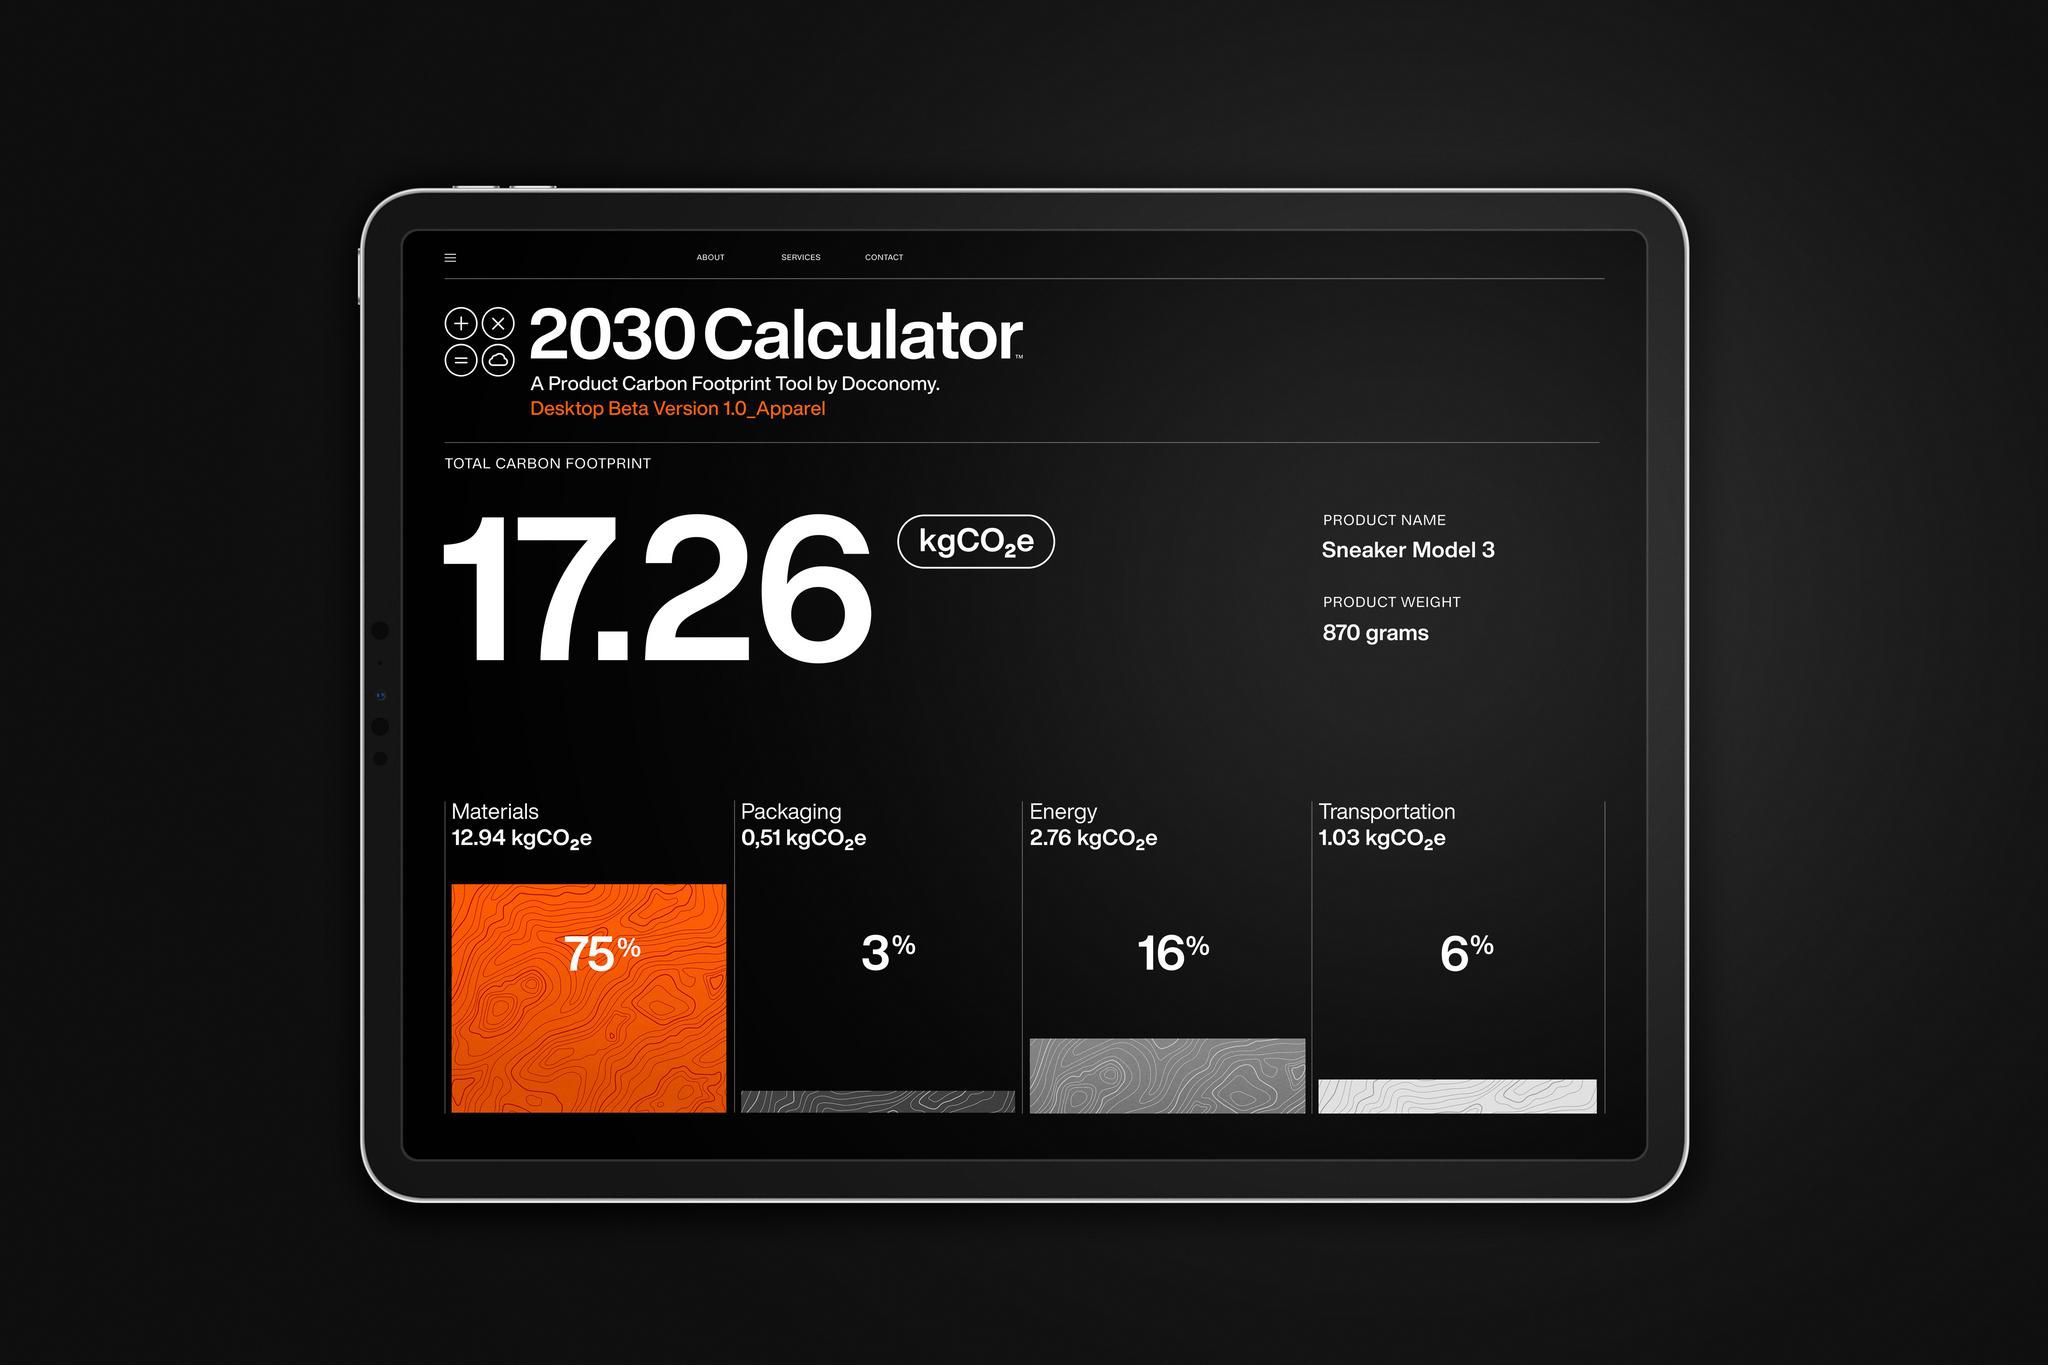 DOCONOMY - The 2030 Calculator - FARM - Cannes Lions 2020 (Supporting Images from The Work - 667456-16314886)